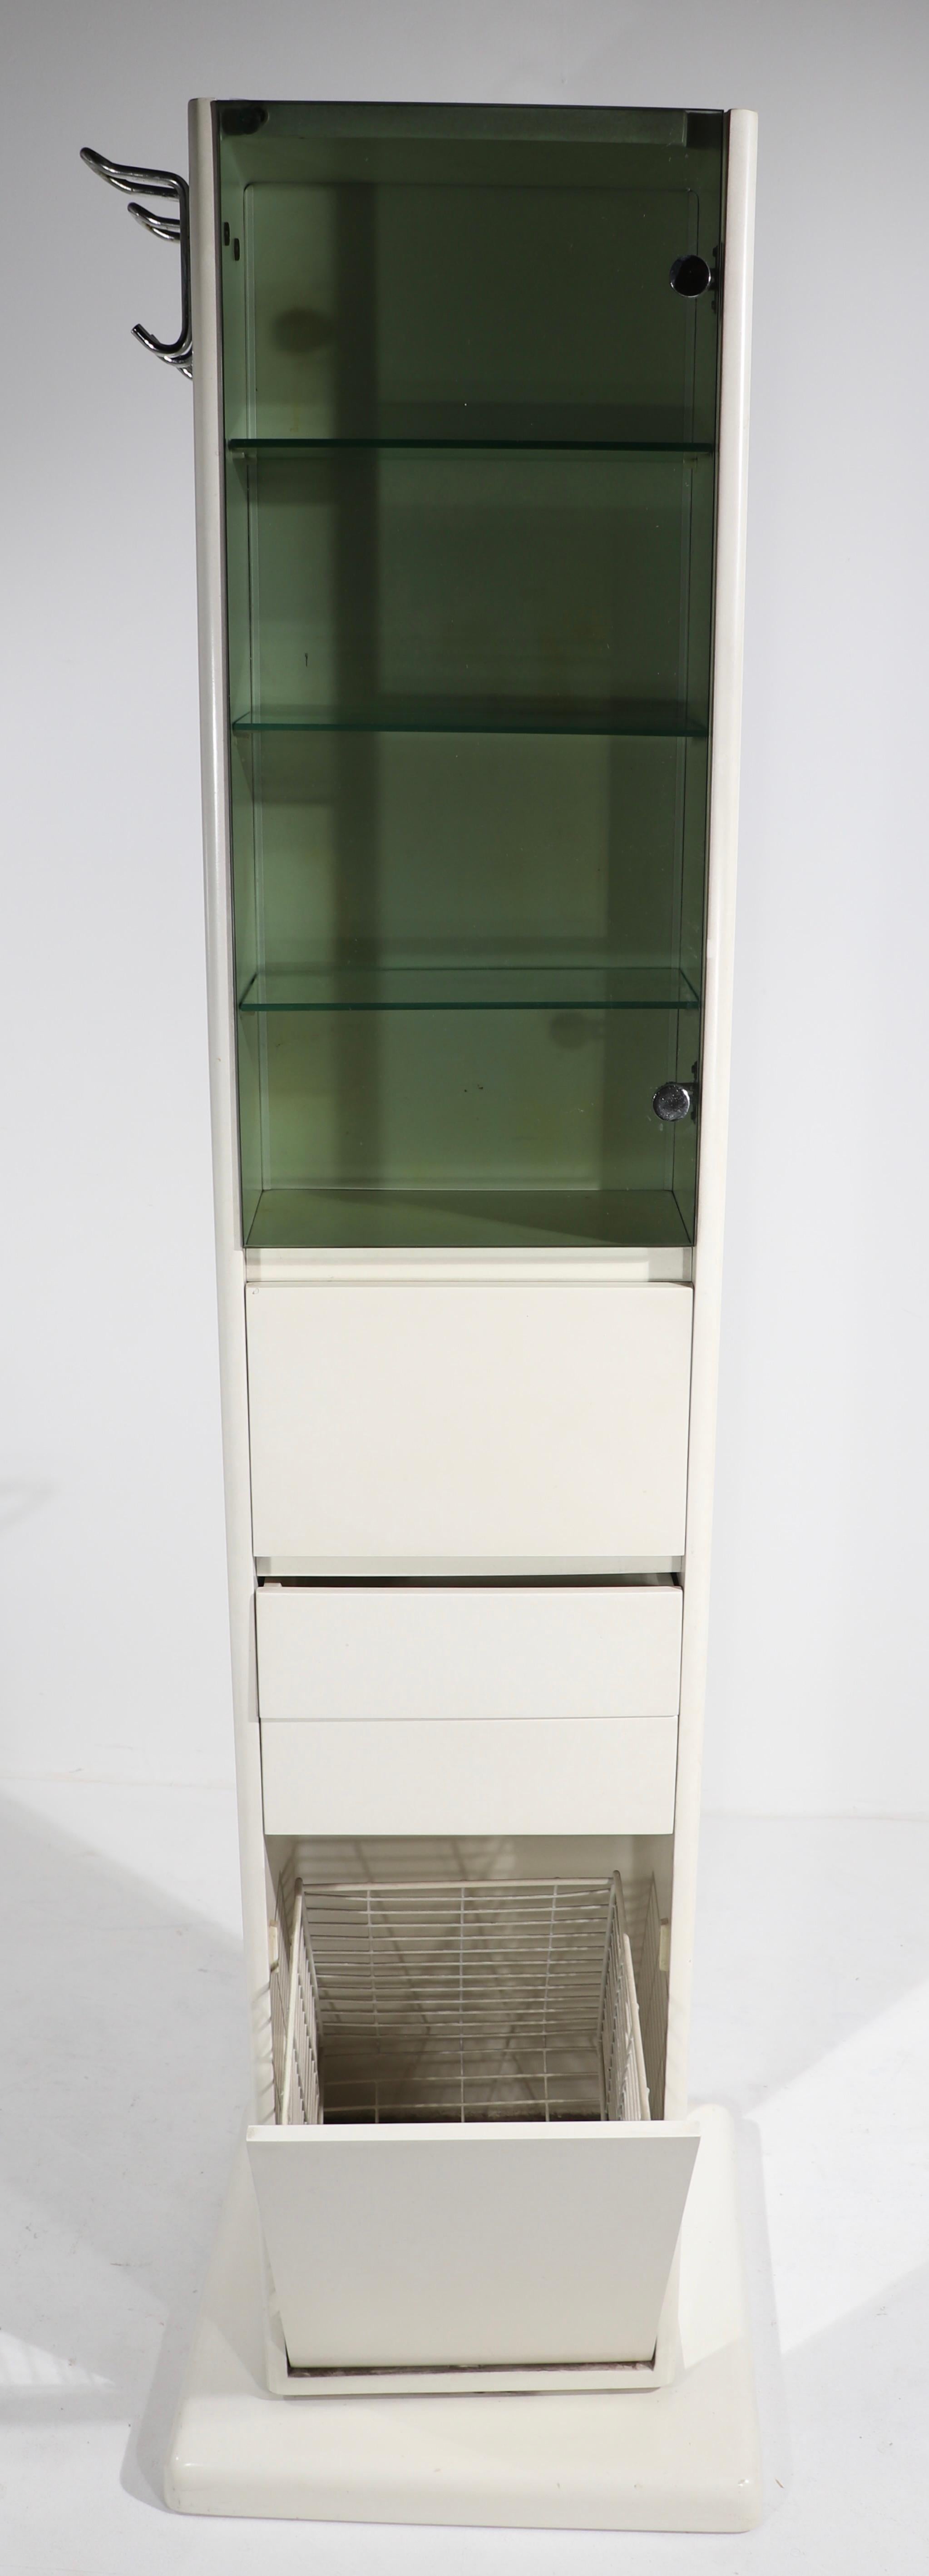 Unusual Revolving Kitchen Storage Cabinet after Colombo 5